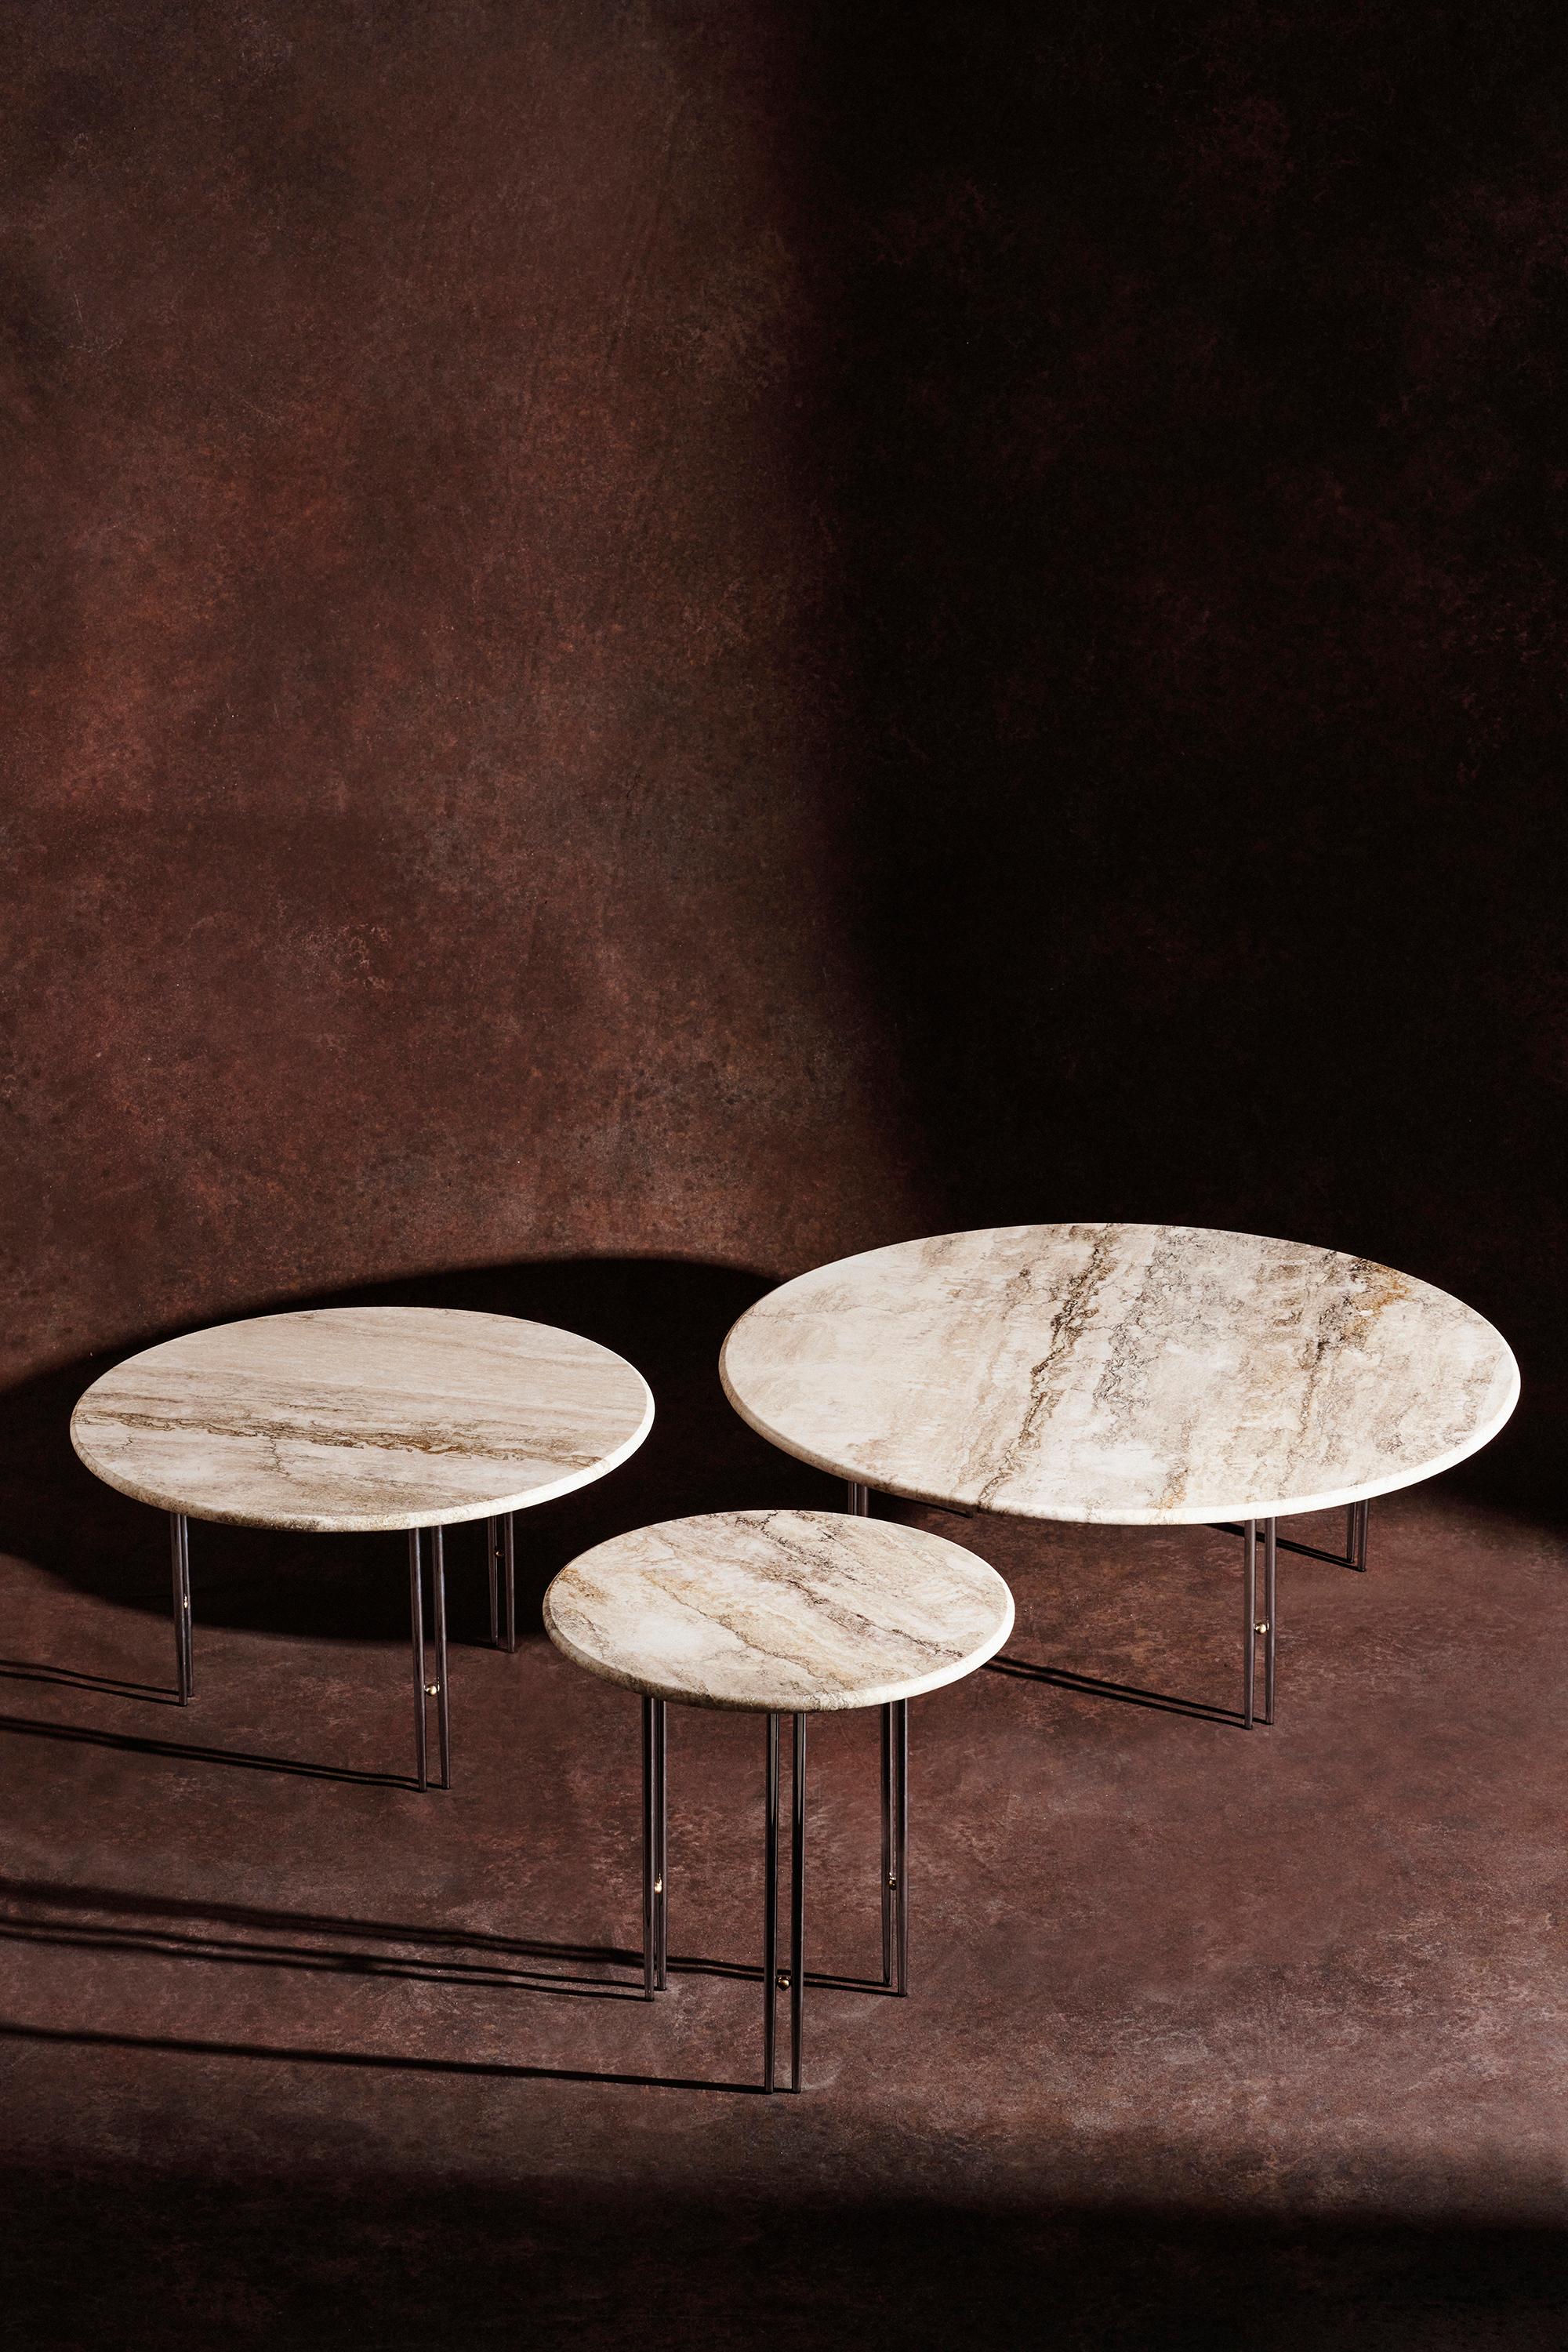 ‘IOI’ Travertine Side Table by GamFratesi for GUBI

A modern-day homage to the elegant geometry of Art Deco design, GamFratesi’s IOI Collection showcases the studio’s dedication to honest materiality and fascination with the interplay of form and